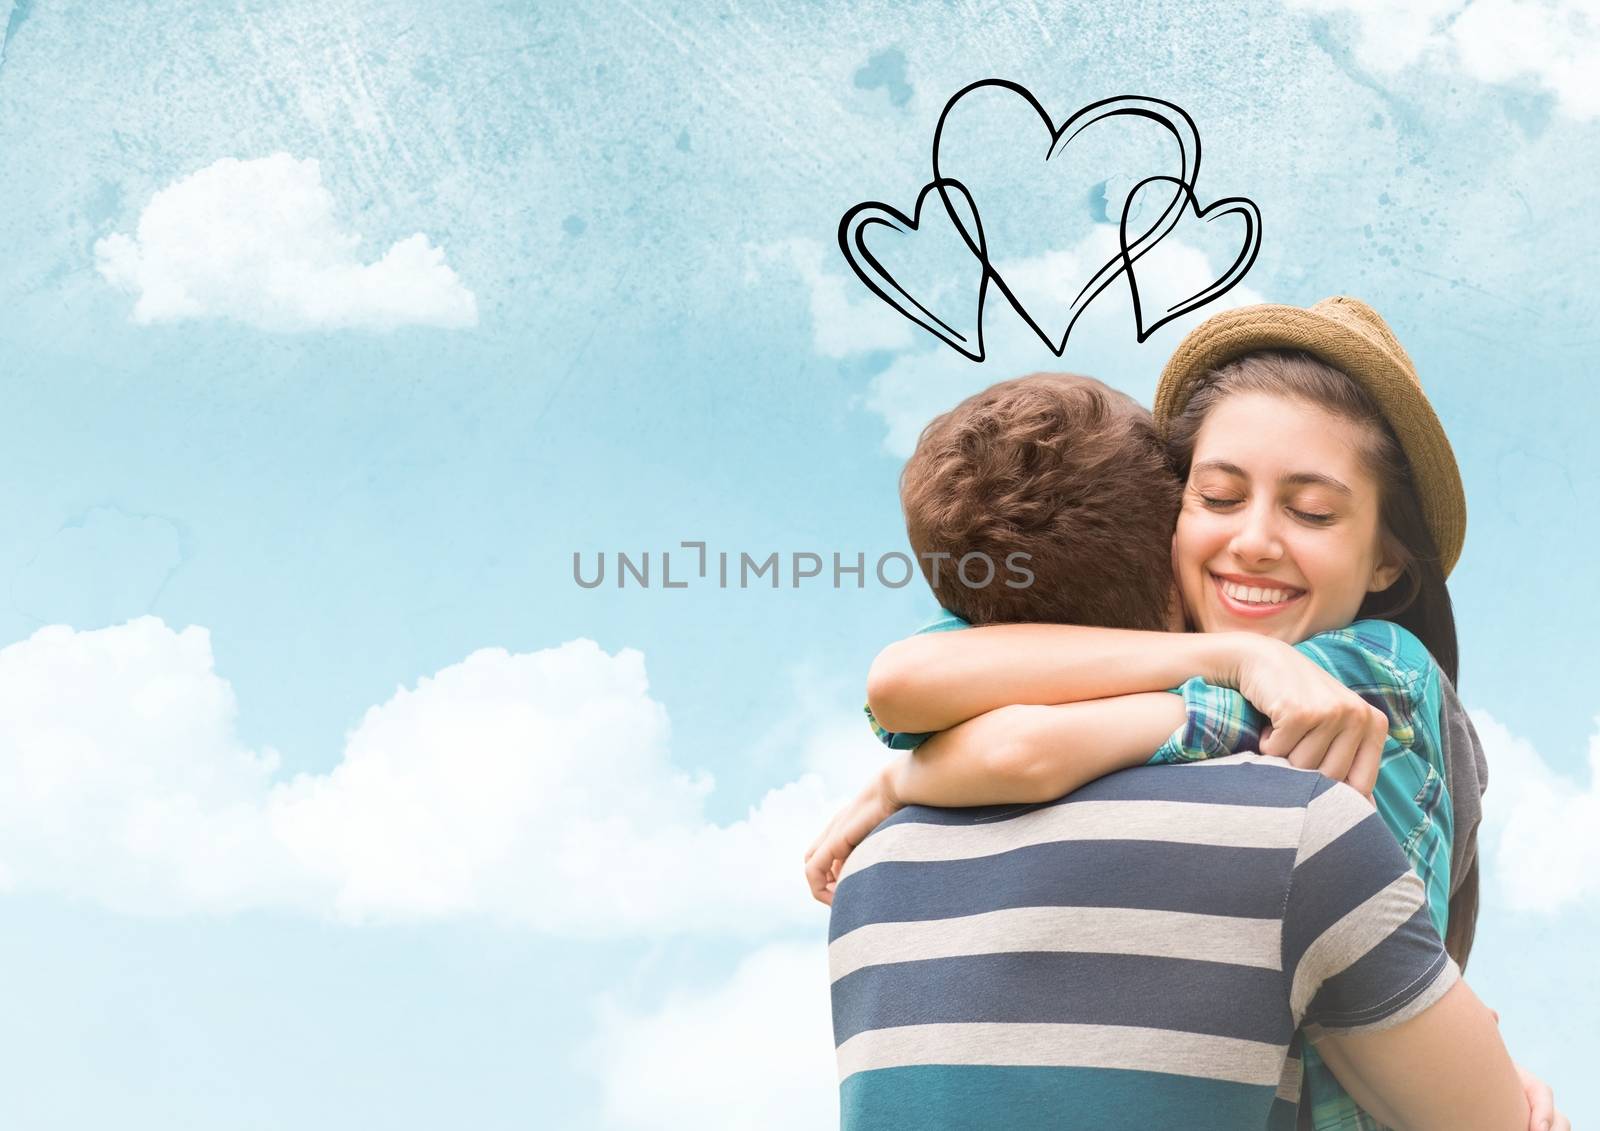 Romantic couple embracing each other with digitally generated heart